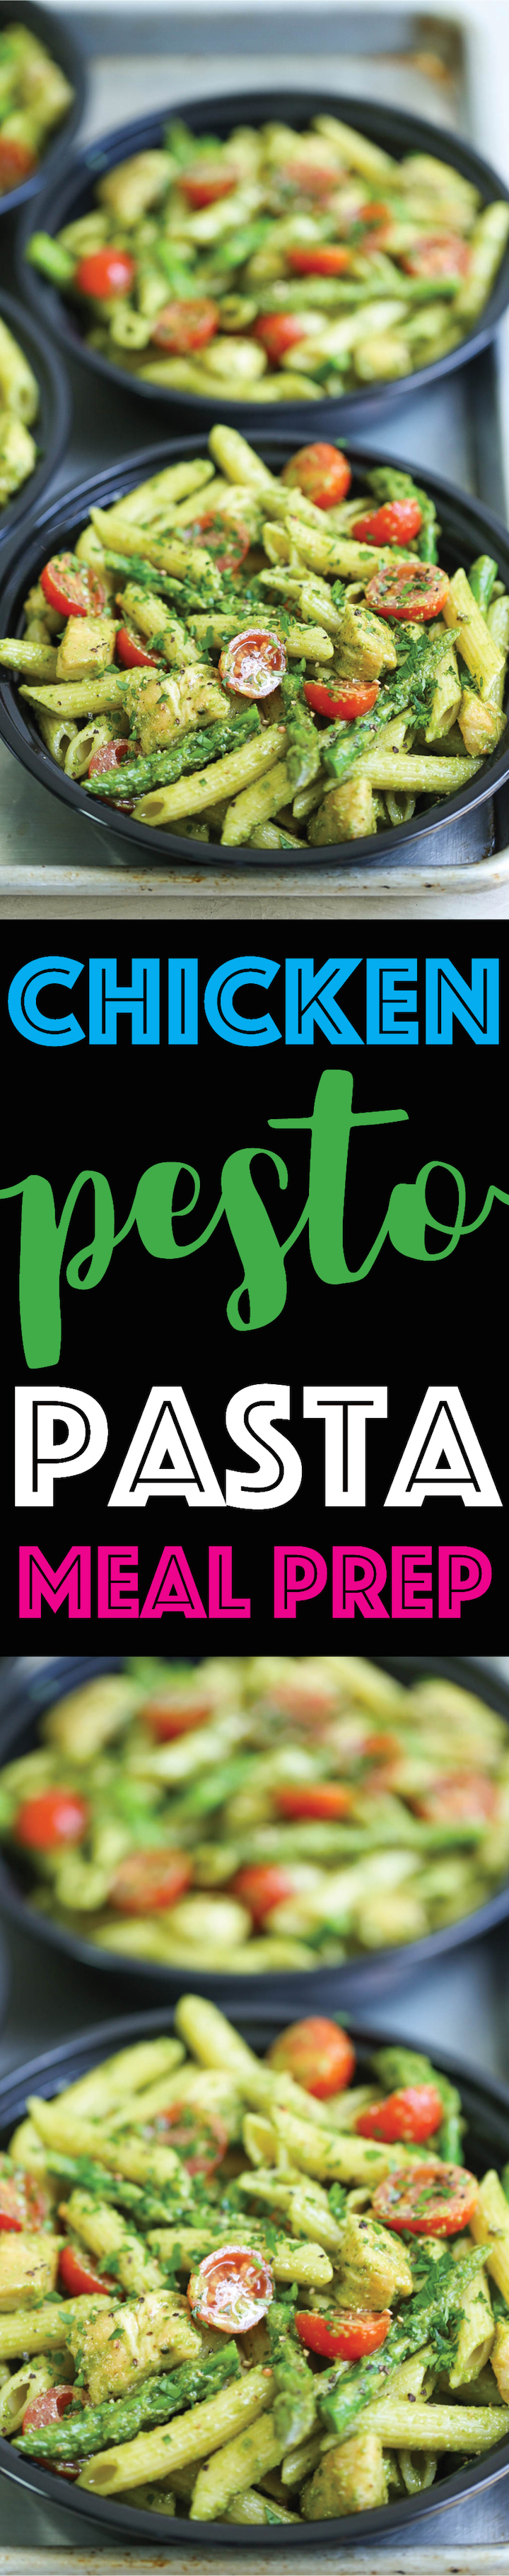 Chicken Pesto Pasta Meal Prep - Fresh, quick and easy! Loaded with chicken, asparagus, tomatoes and whole wheat pasta. Use homemade or store-bought pesto!